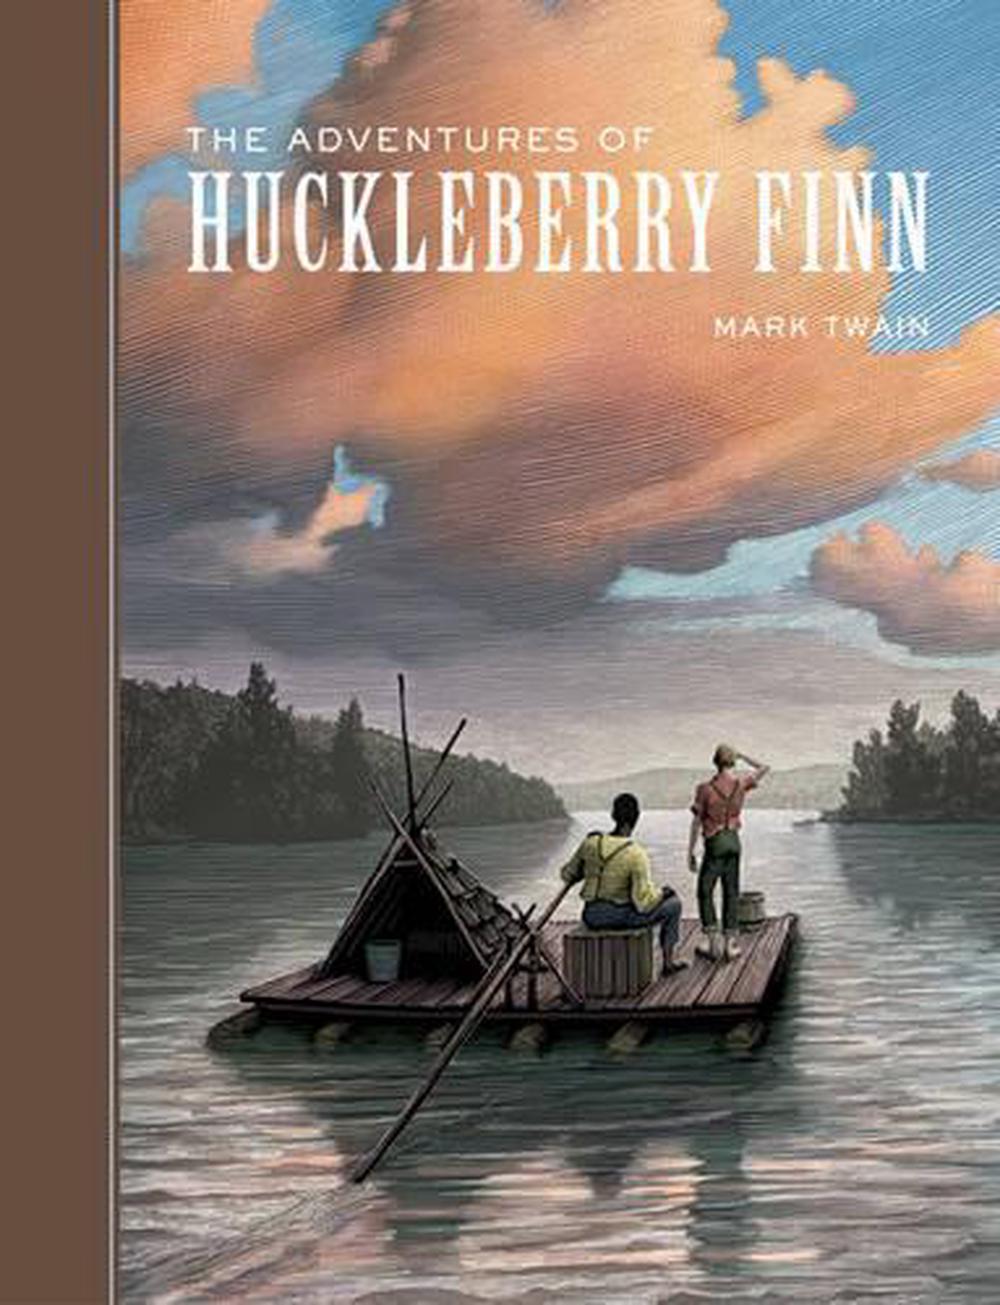 book report on the adventures of huckleberry finn